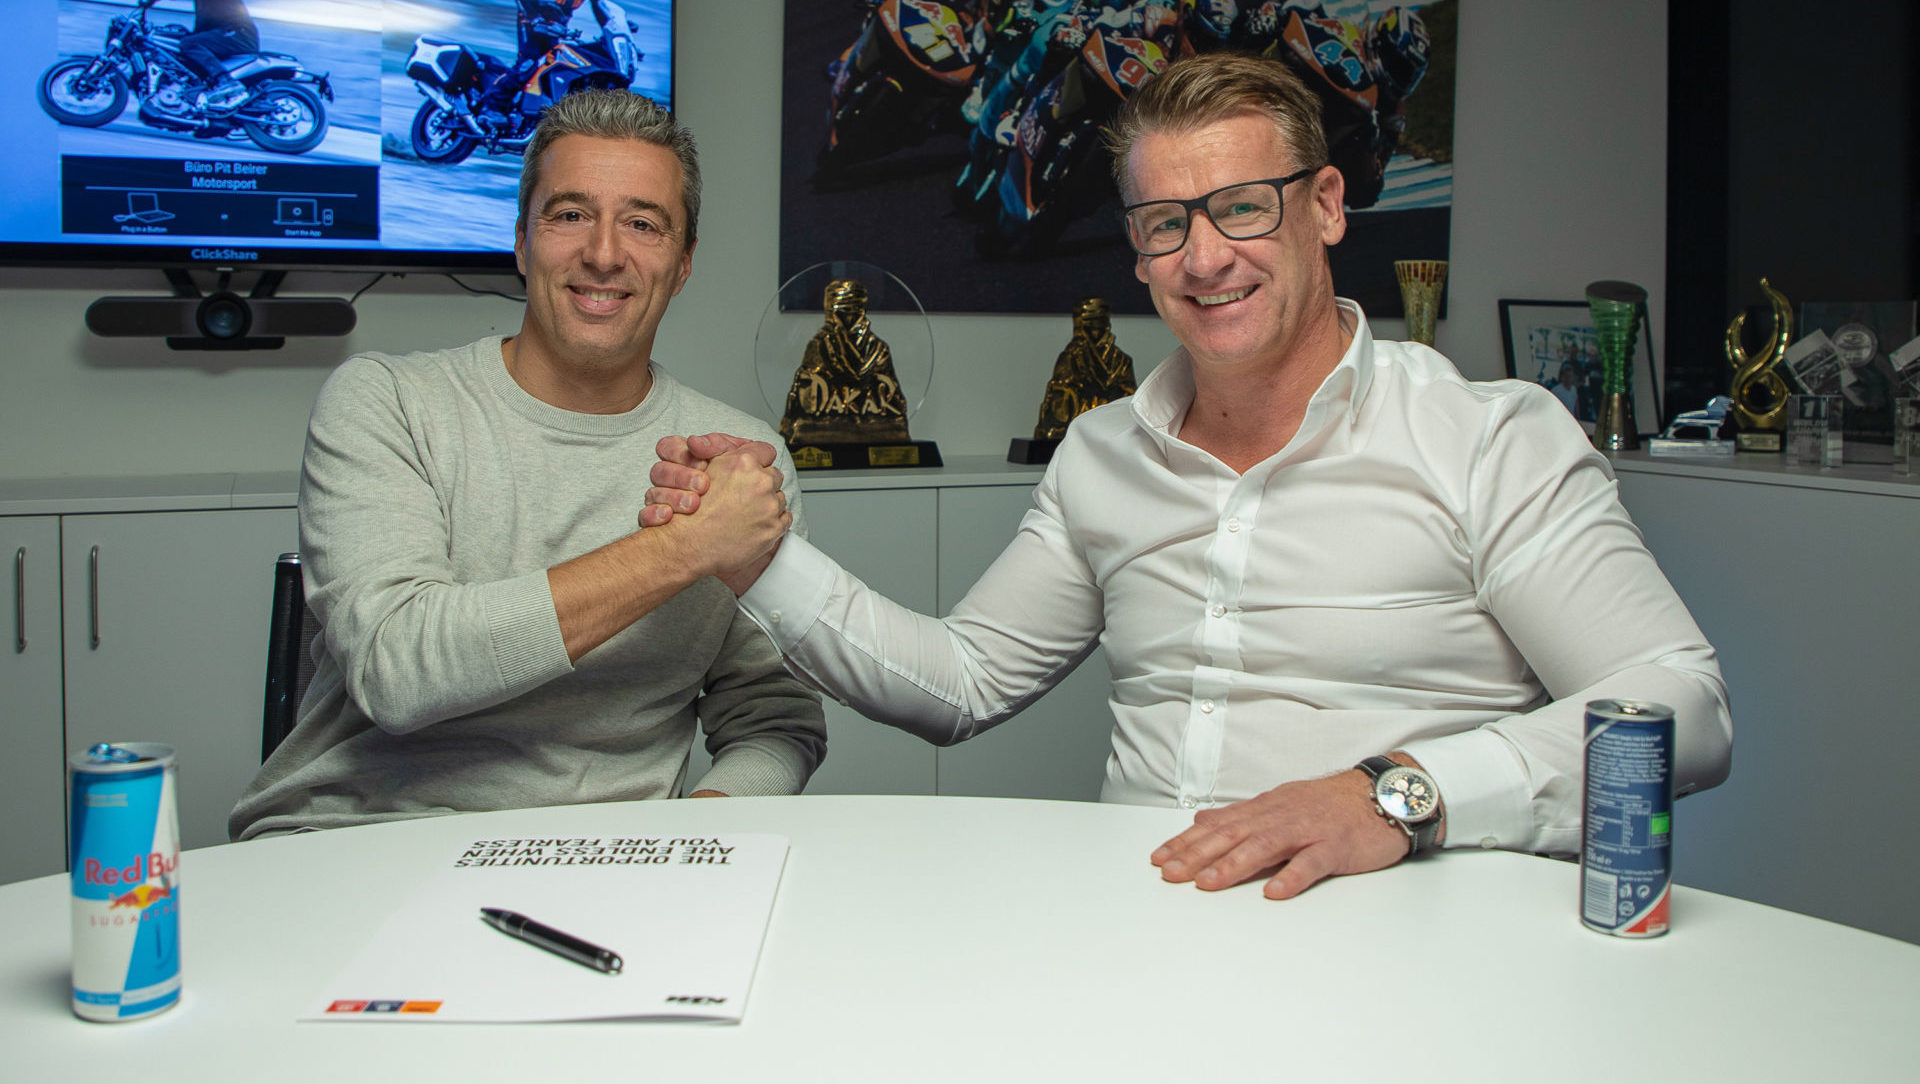 Francesco Guidotti (left) with Pit Beirer, KTM Motorsports Director (right). Photo courtesy KTM Factory Racing.